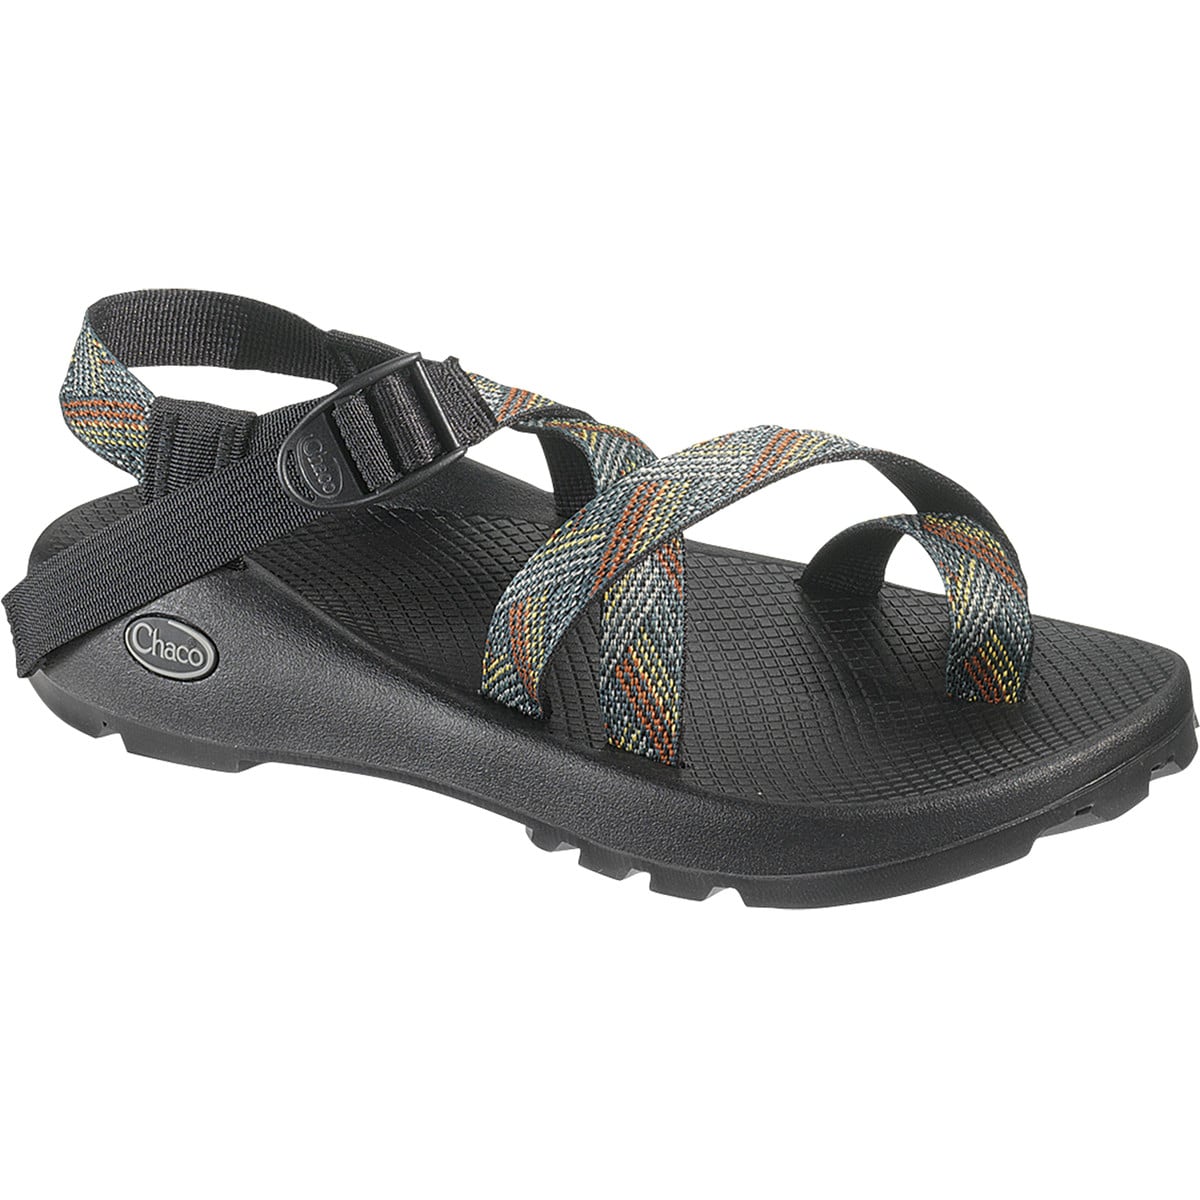 Details about Chaco Z2 Unaweep Sandal - Men's